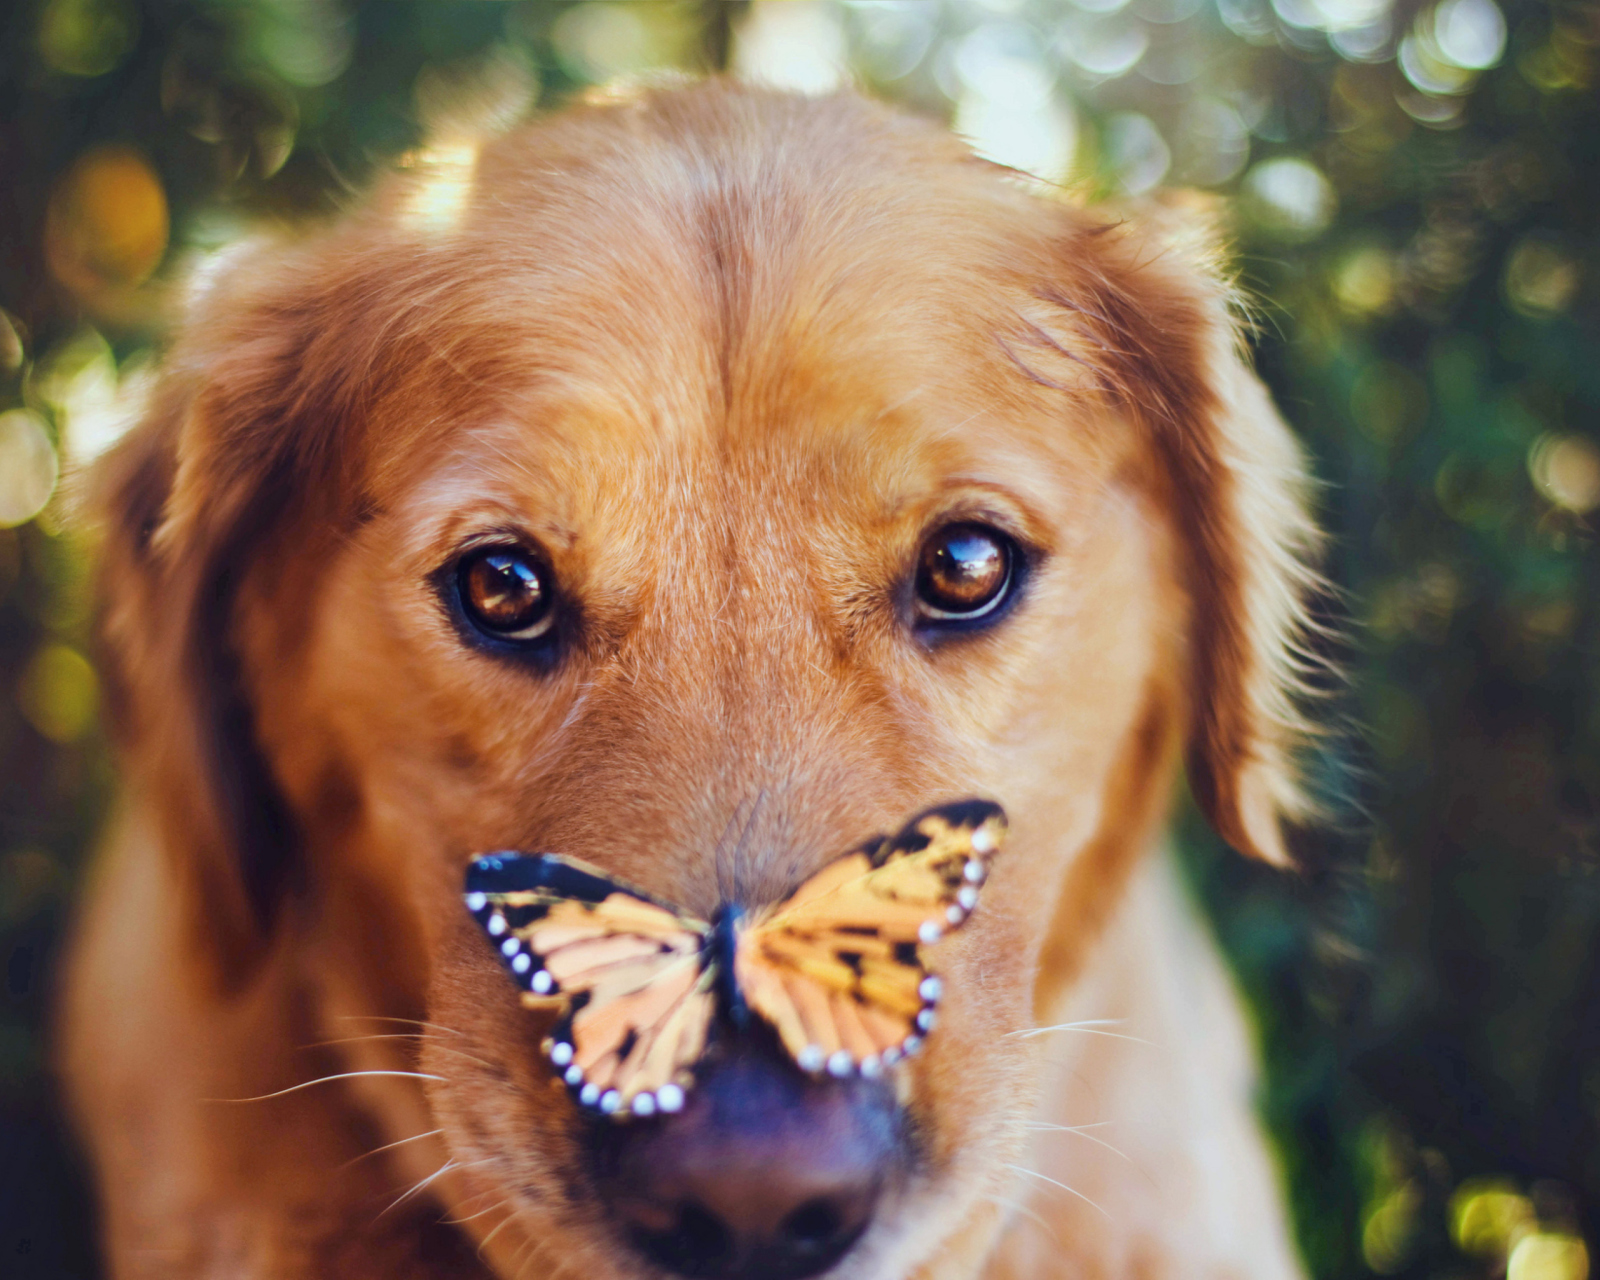 Dog And Butterfly wallpaper 1600x1280